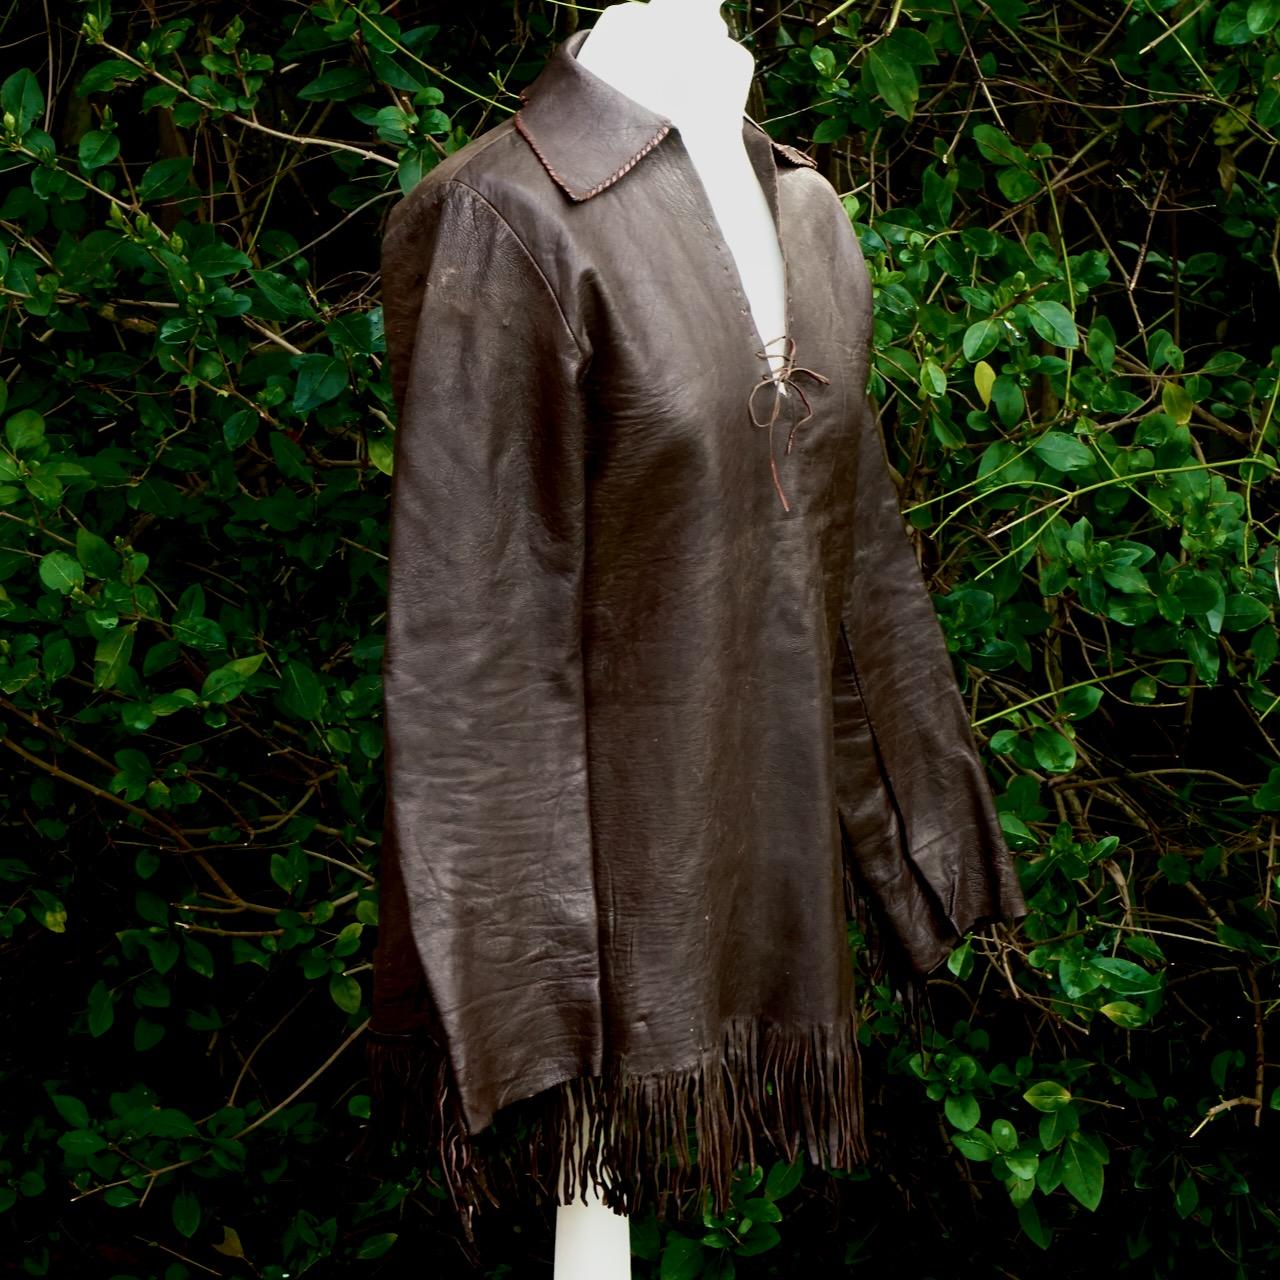 Women's or Men's Soft Brown Leather Fringed Top from Lord John of Carnaby Street, London, 1960s For Sale